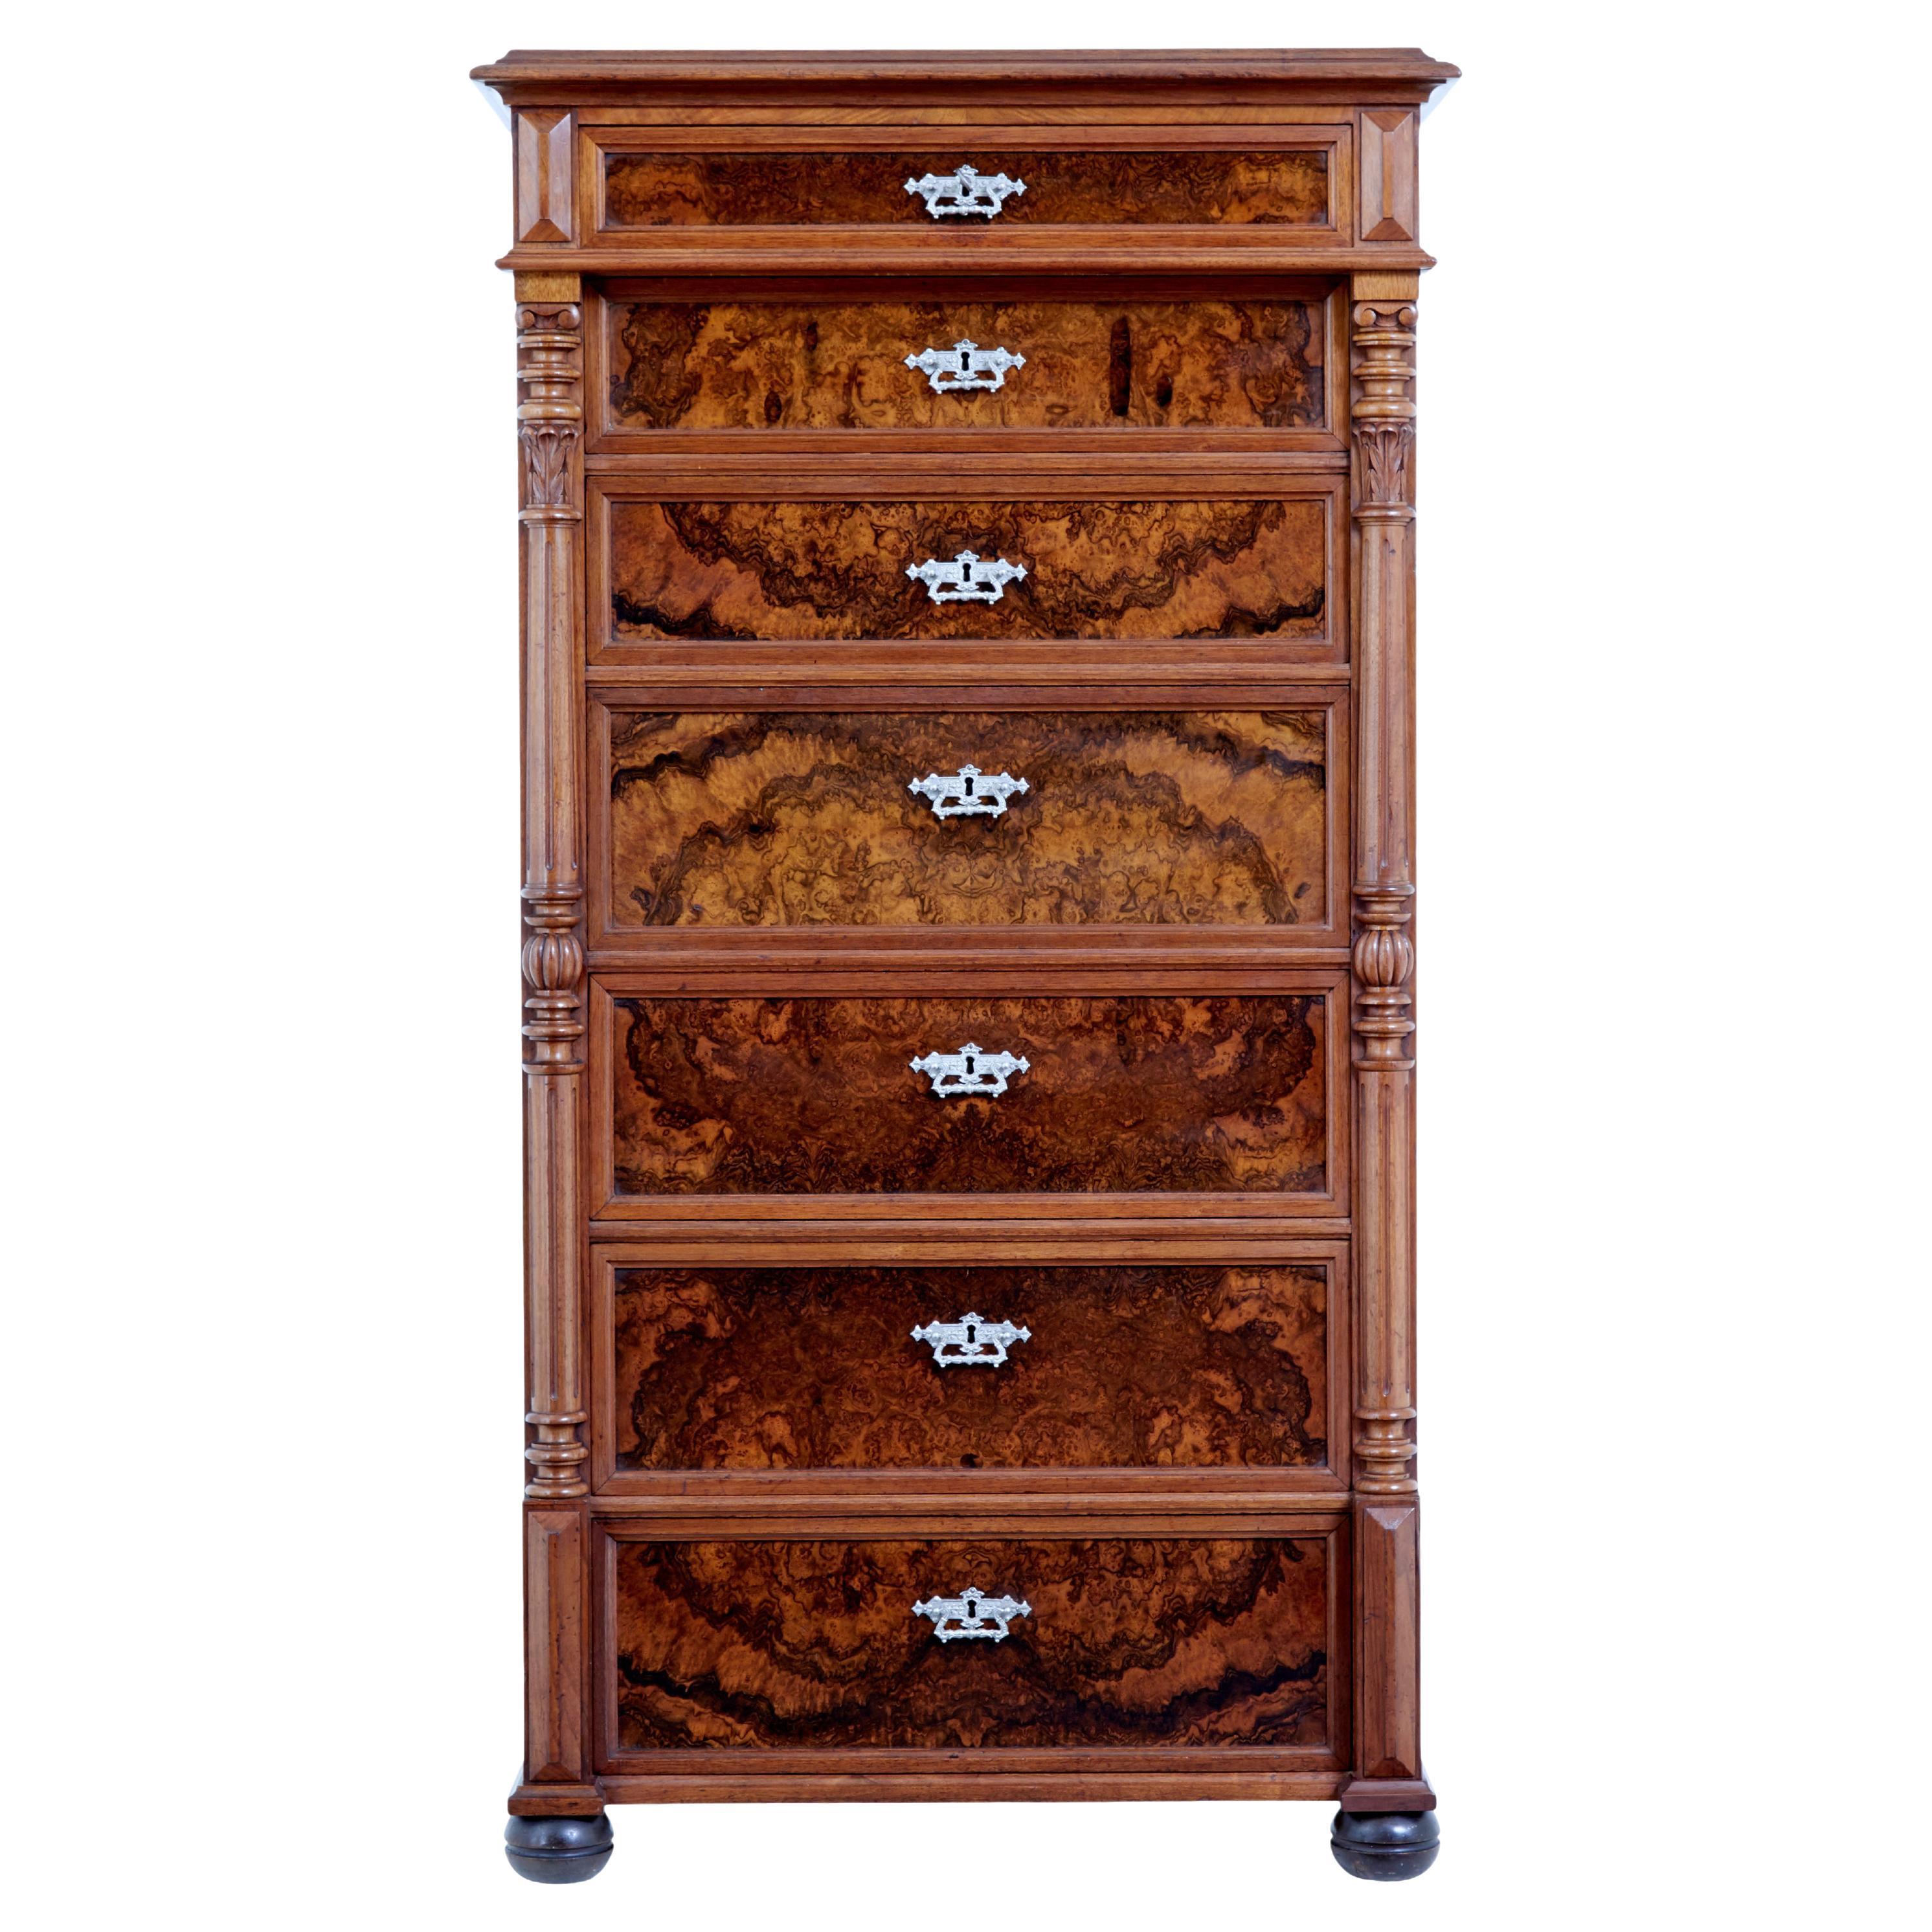 19th Century Burr Walnut Secretaire Tall Chest of Drawers